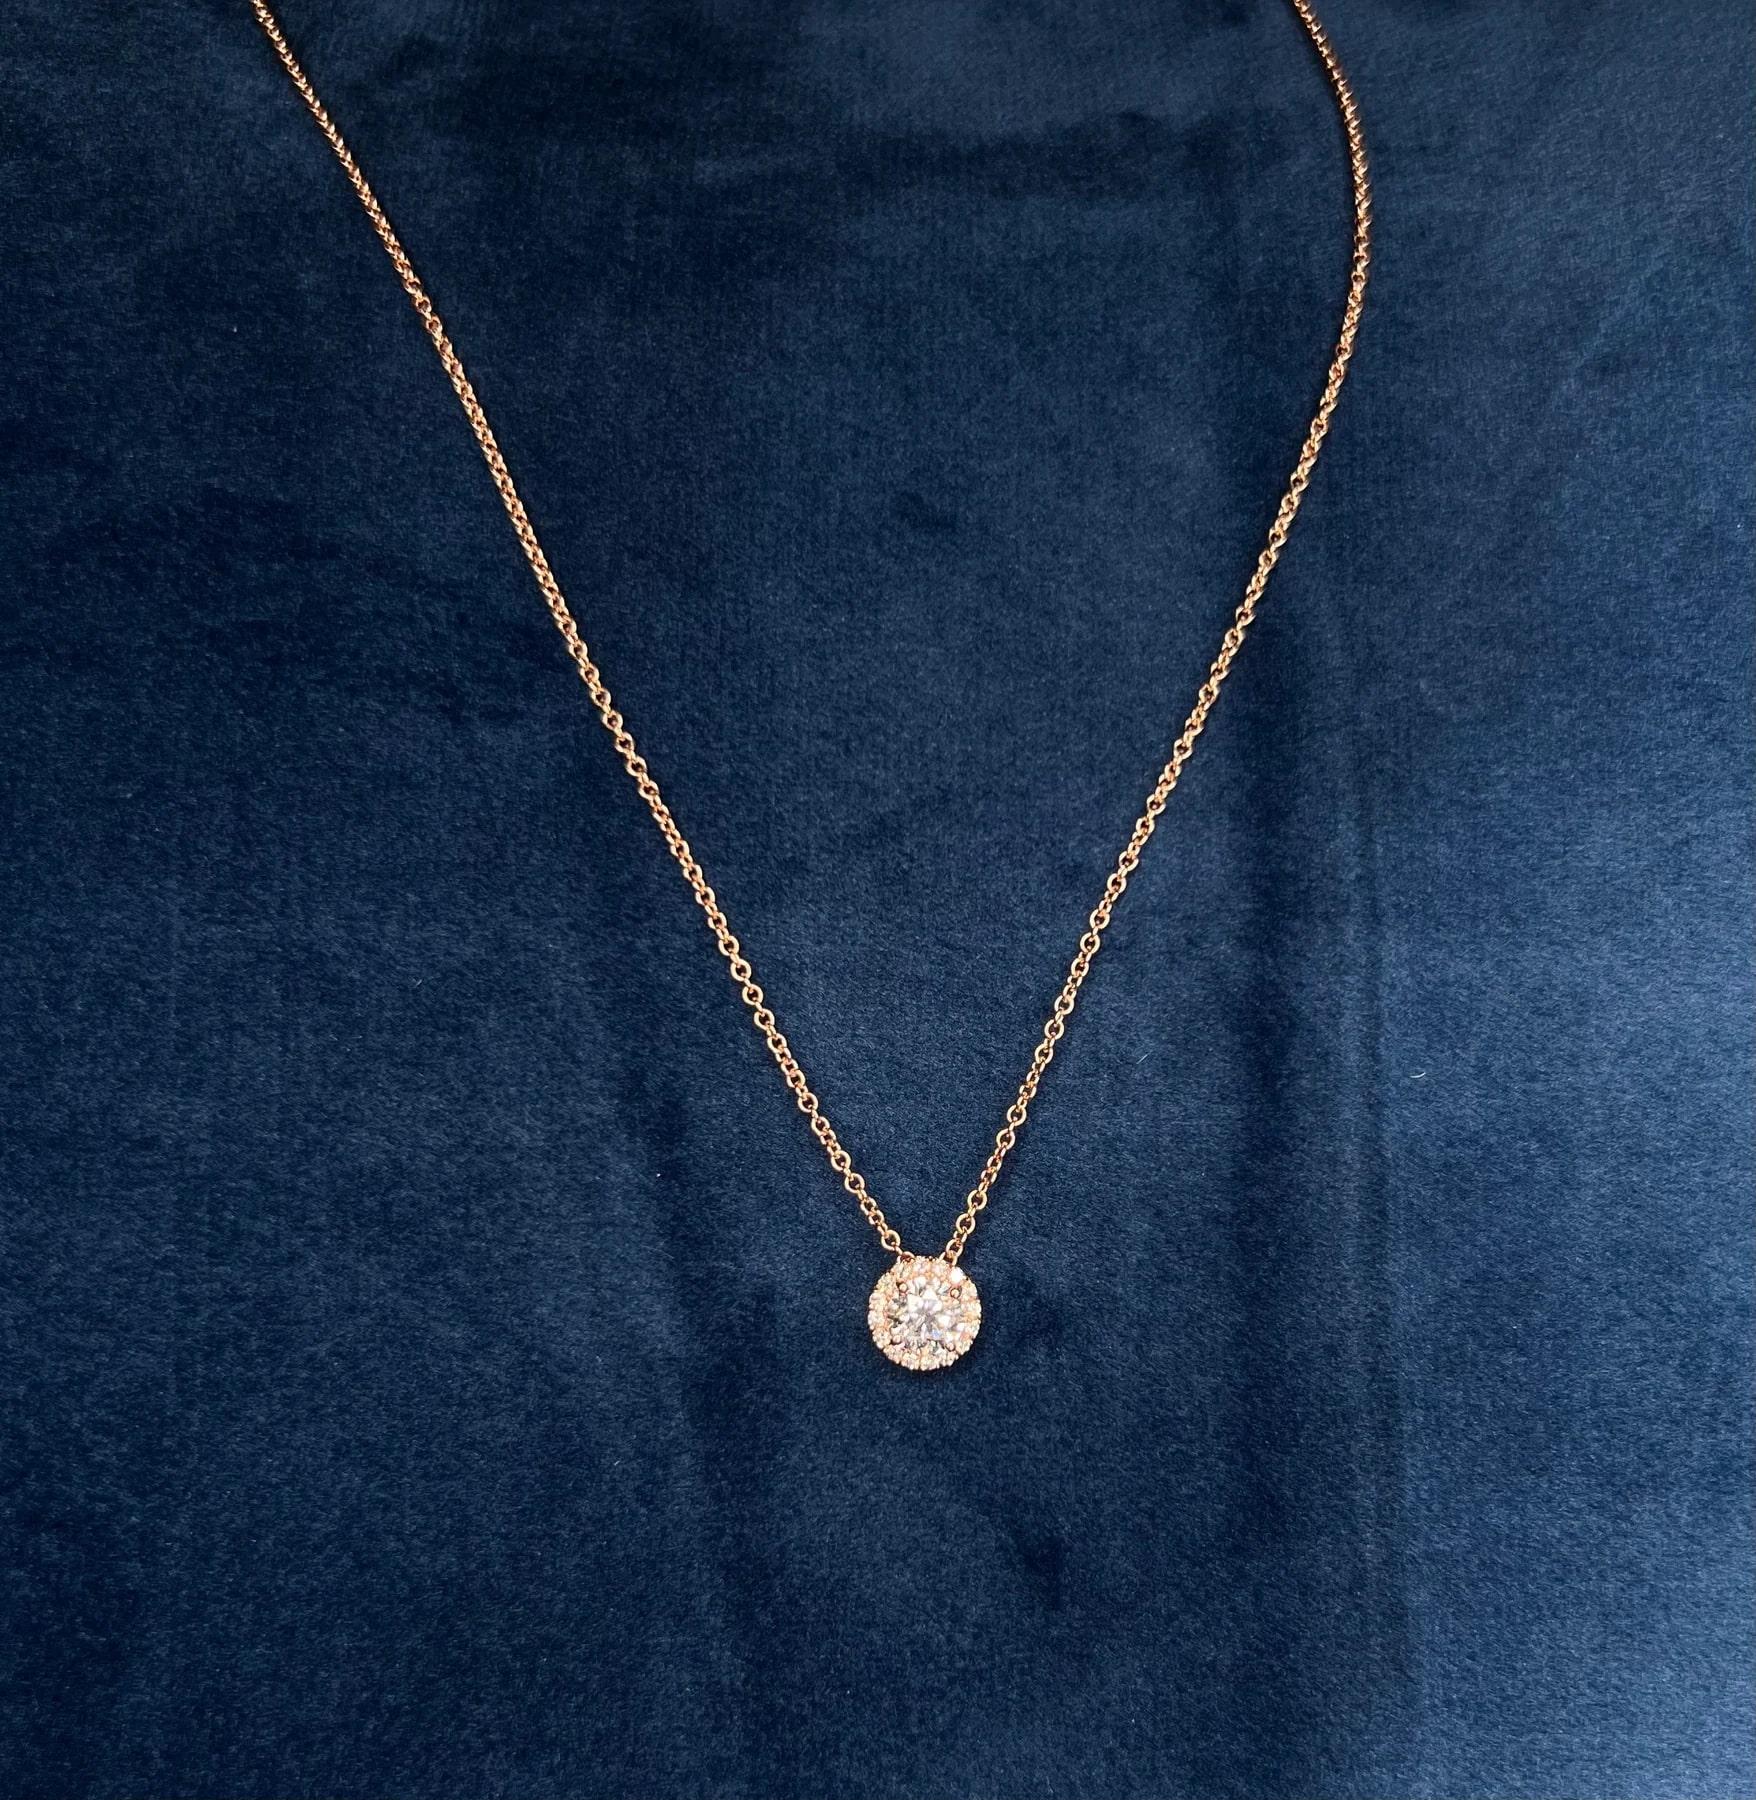 Harmony's Diamond Pendant Necklace In New Condition For Sale In Los Angeles, CA